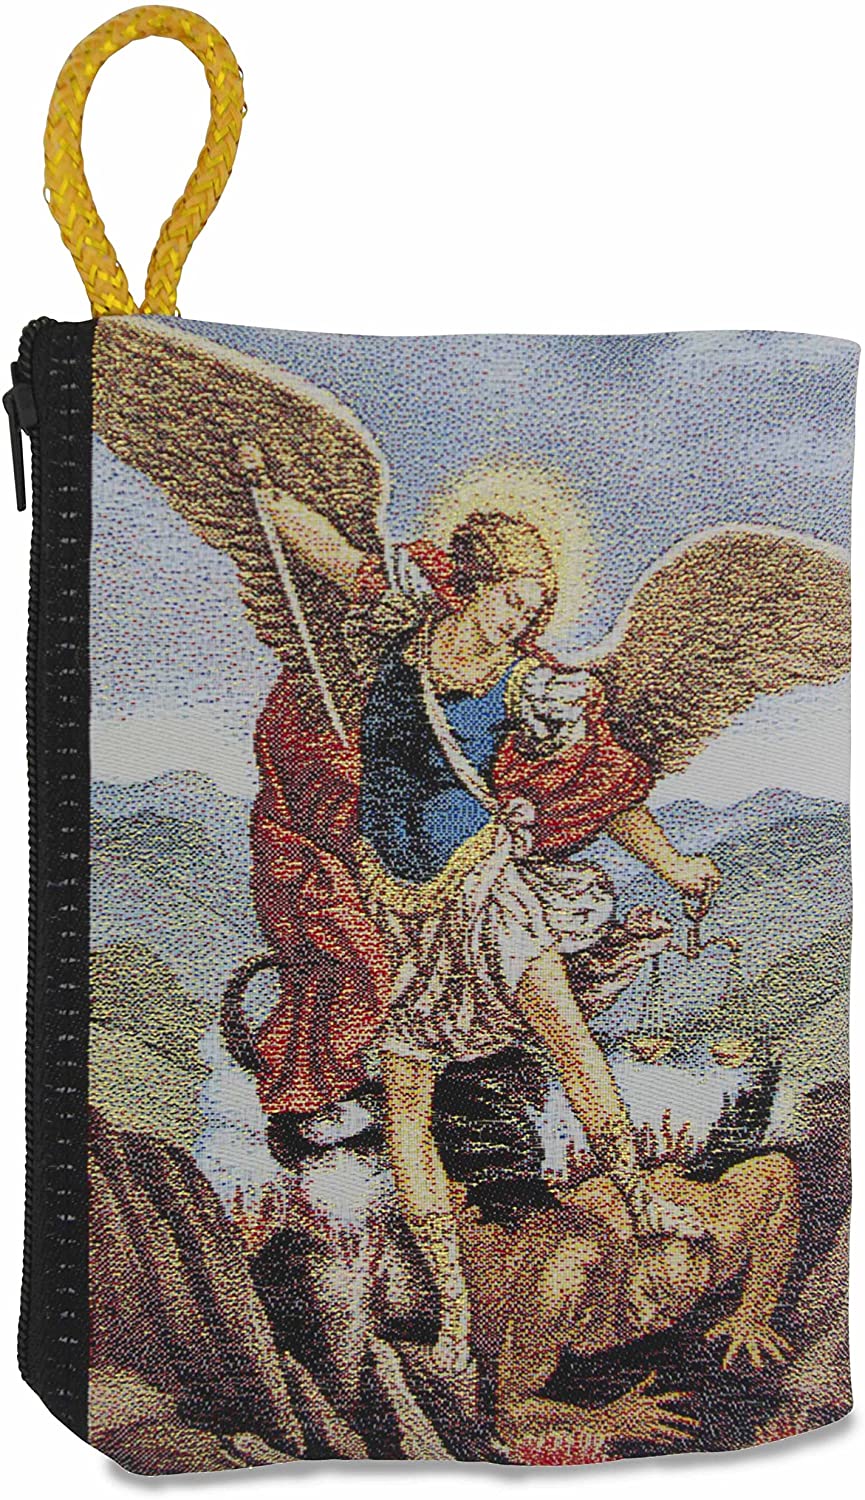 Religious Gifts St Saint Michael Tapestry Keepsake Rosary Icon Pouch